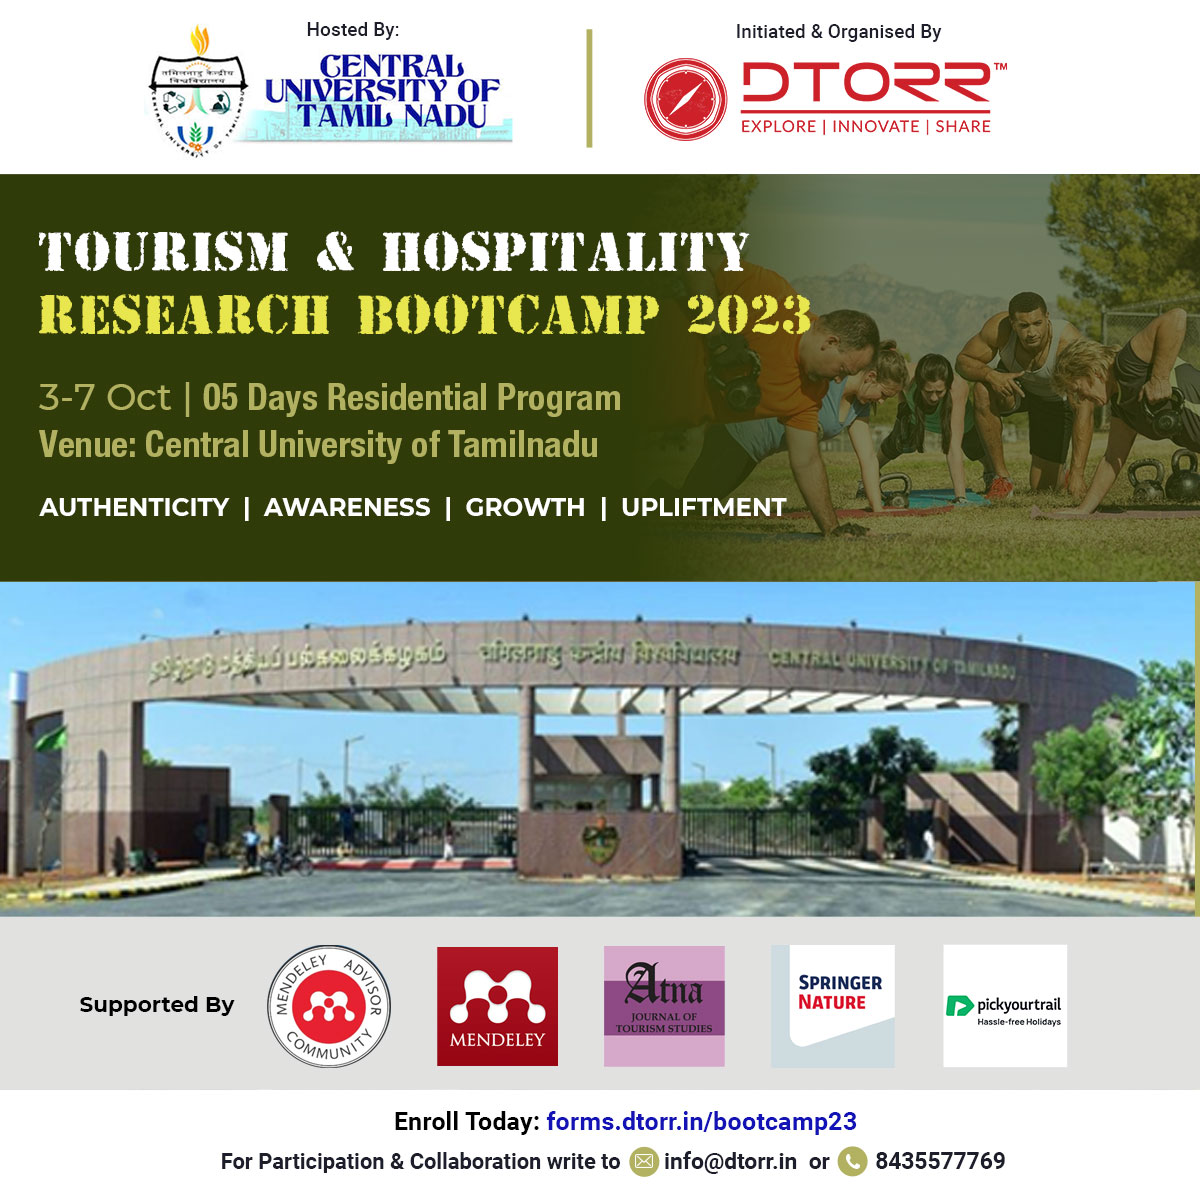 Tourism & Hospitality Research Bootcamp 2023